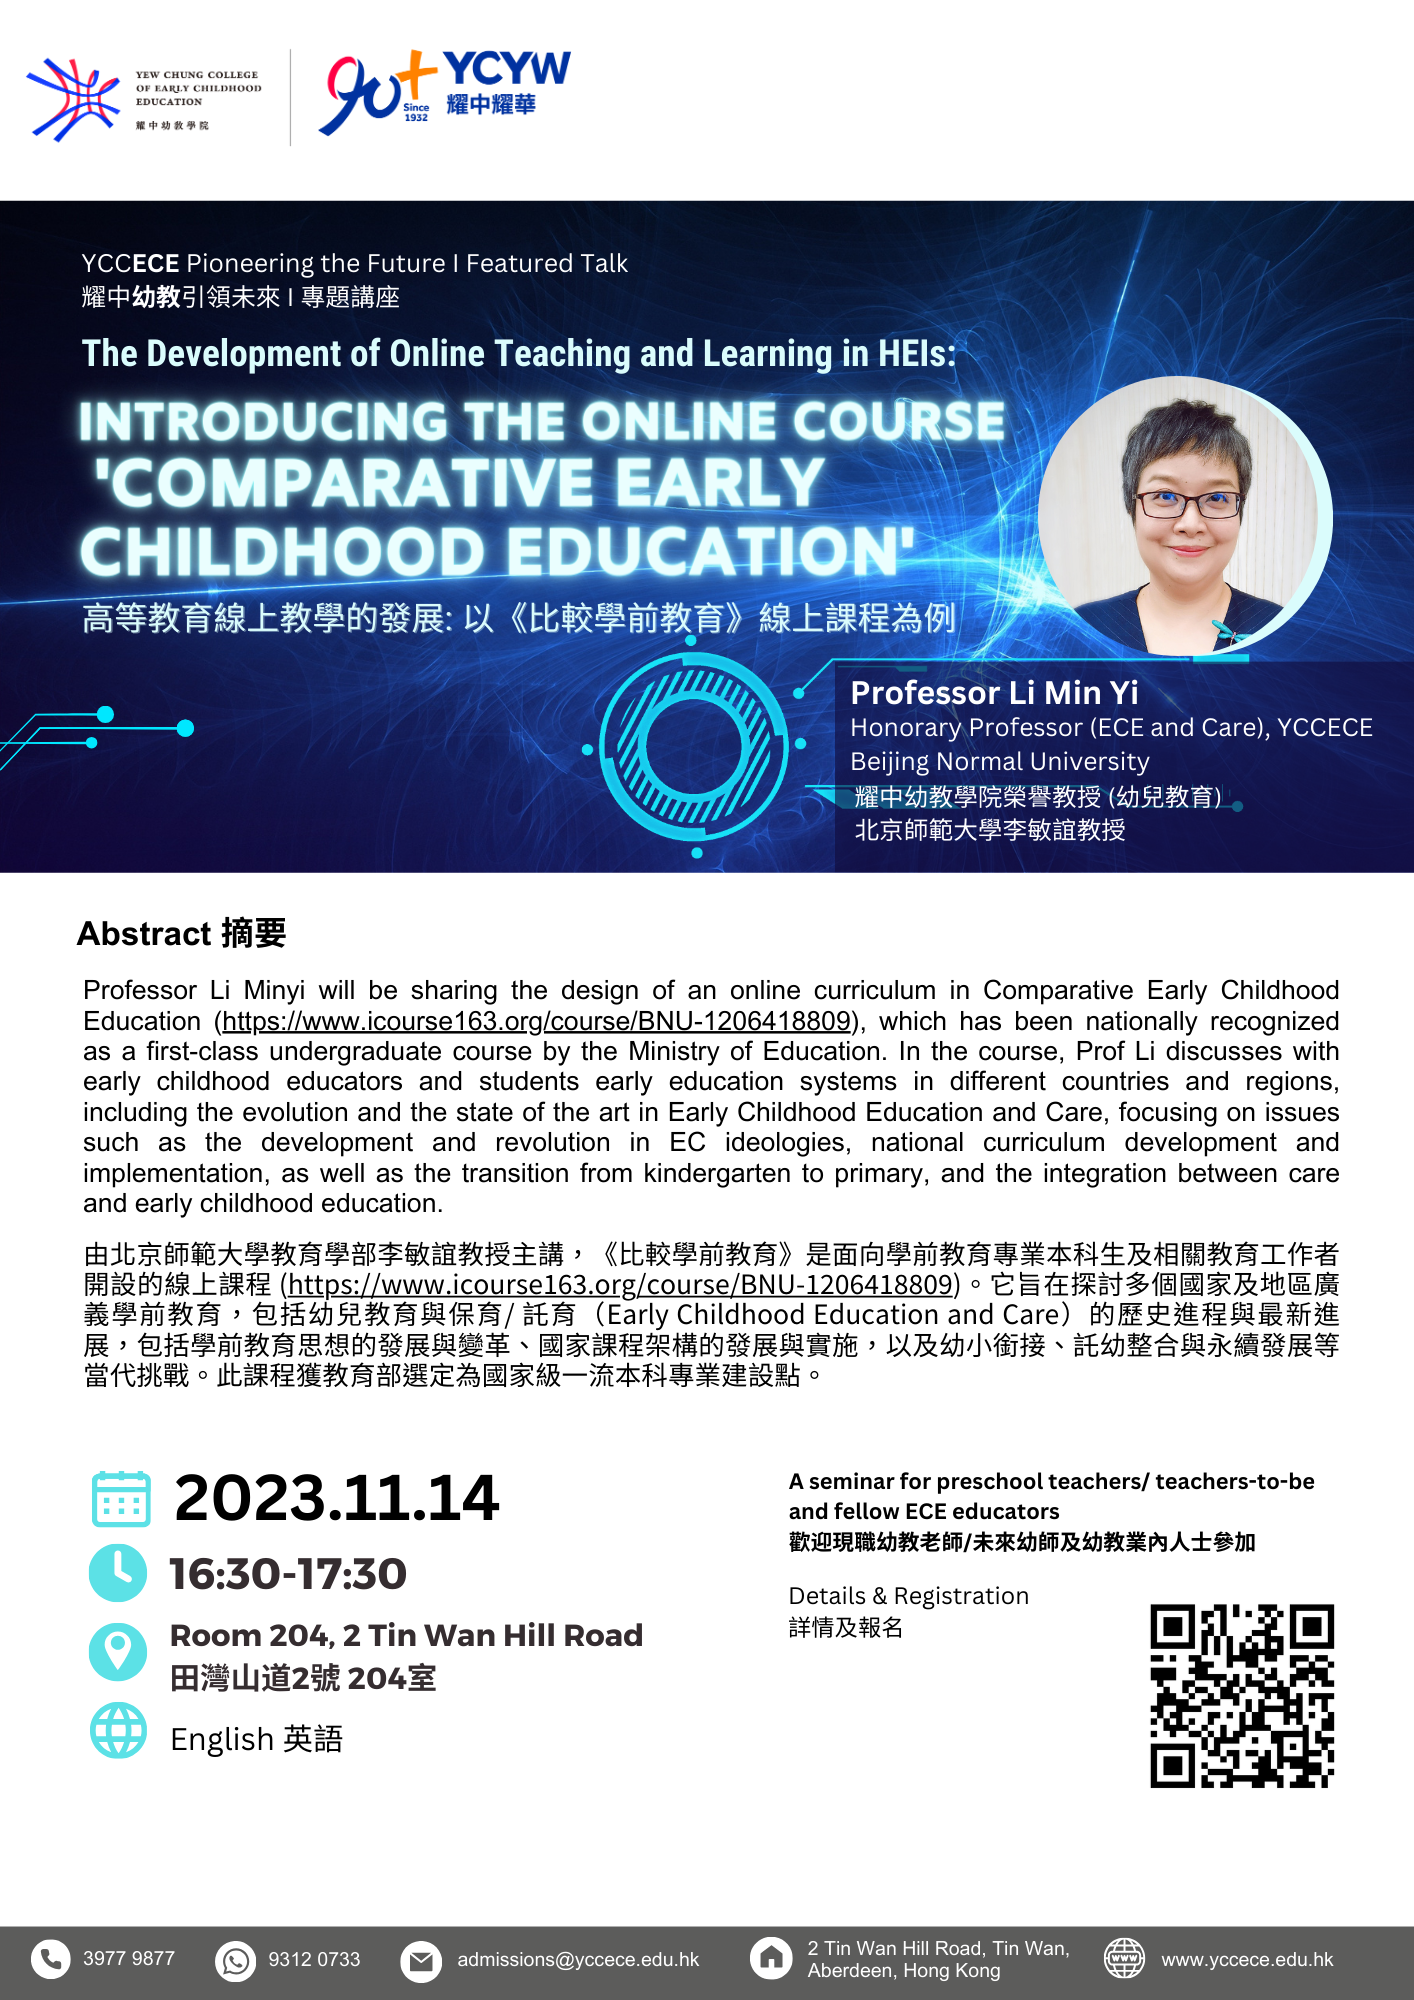 The Development of Online Teaching and Learning in HEIs: Introducing the Online Course  'Comparative Early Childhood Education'